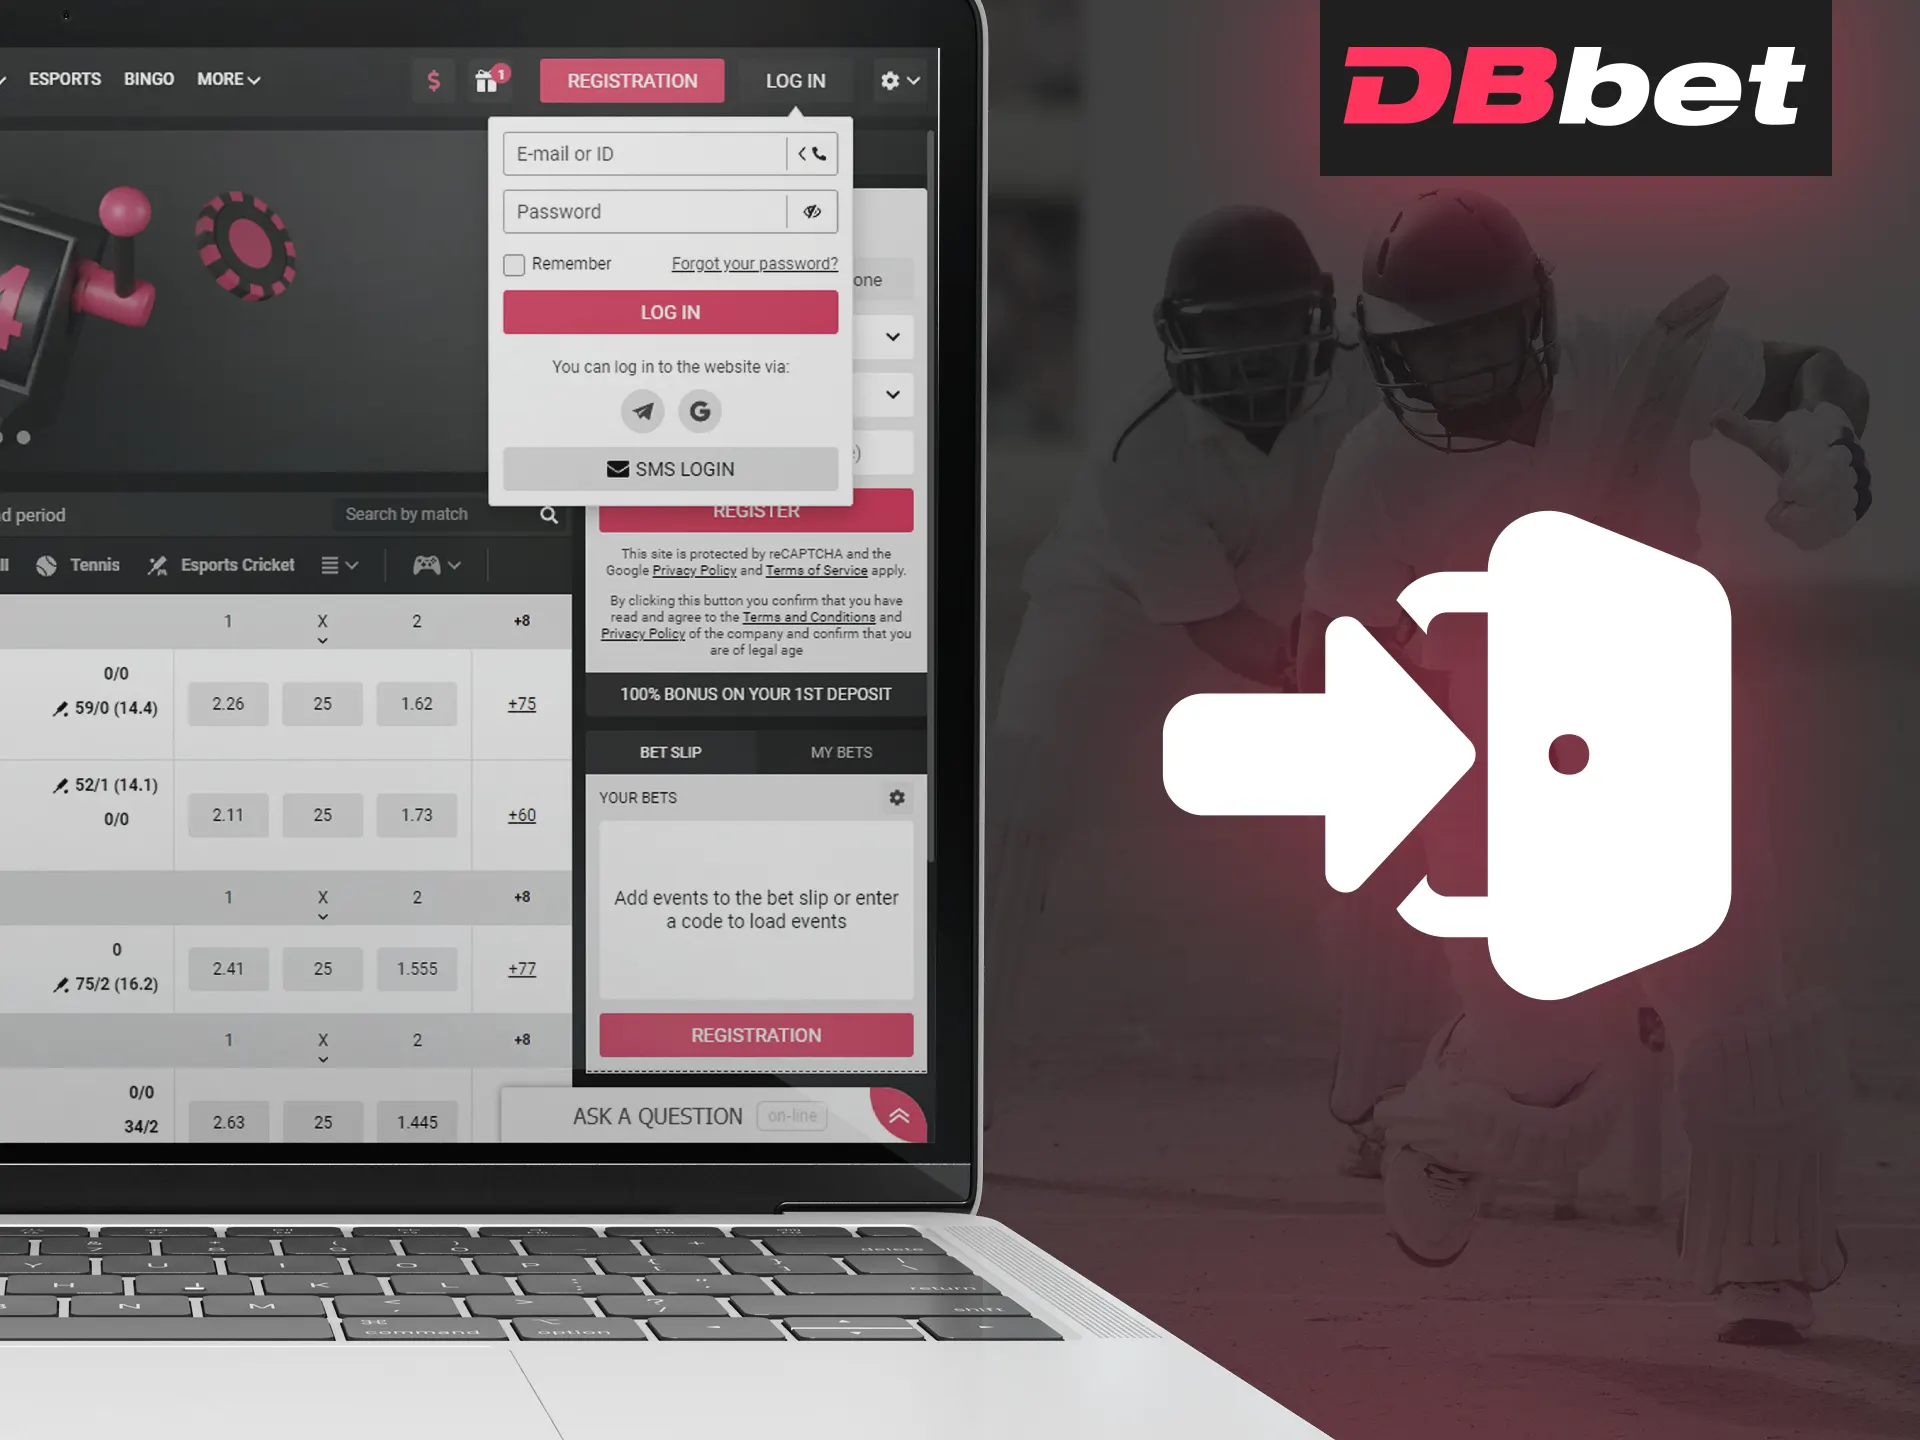 Log in to your DBBet account to access all features.